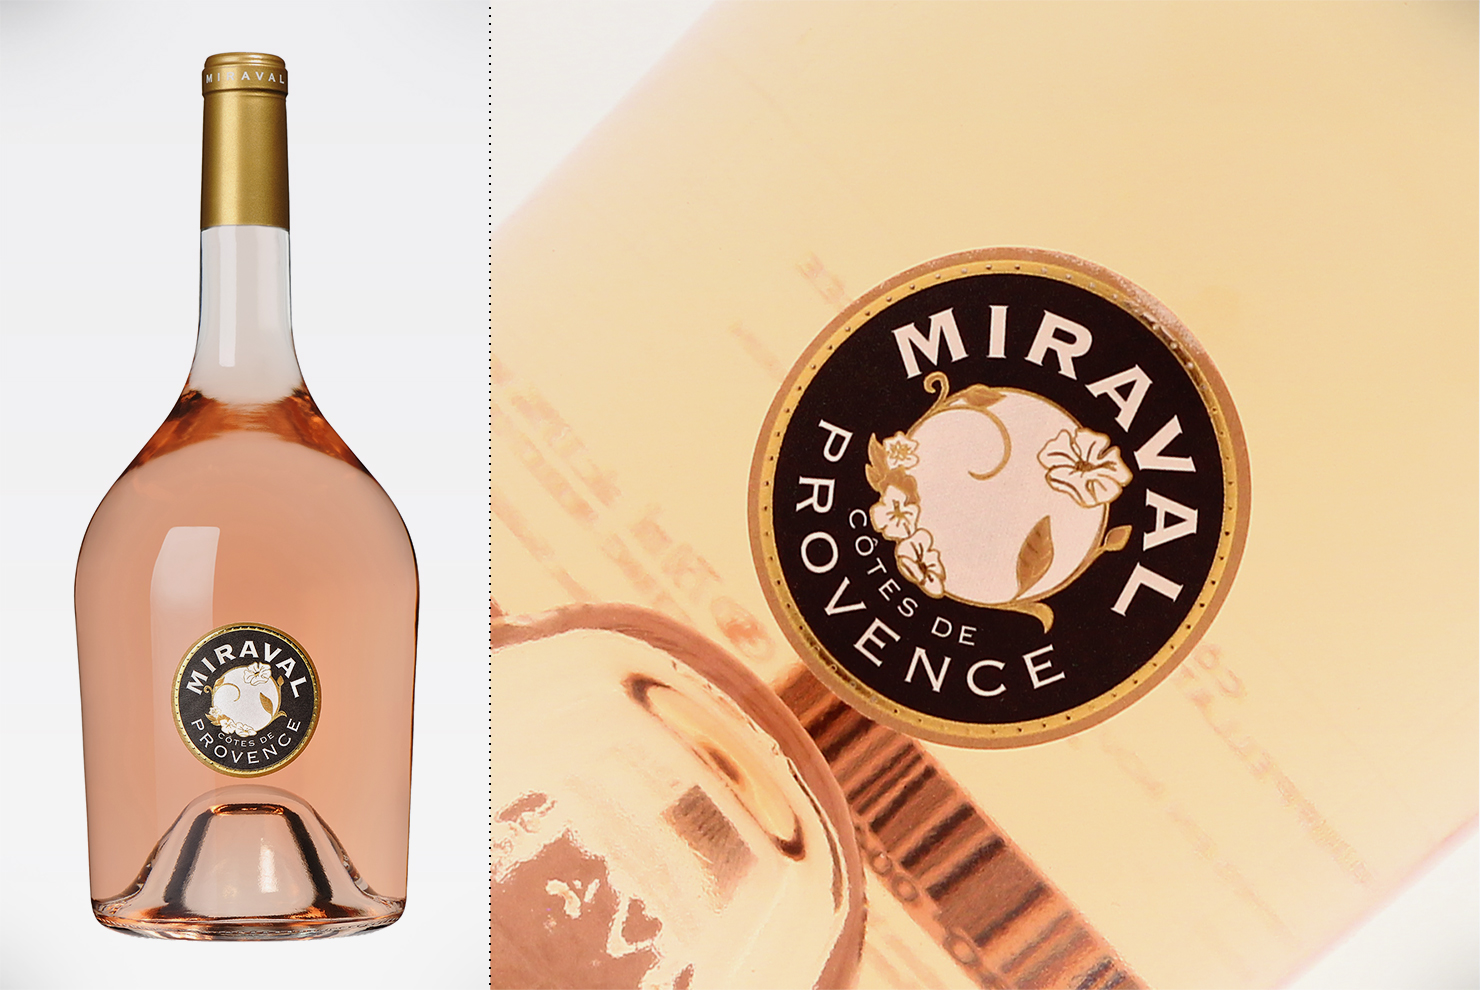 CHATEAU MIRAVAL ROSE 2016